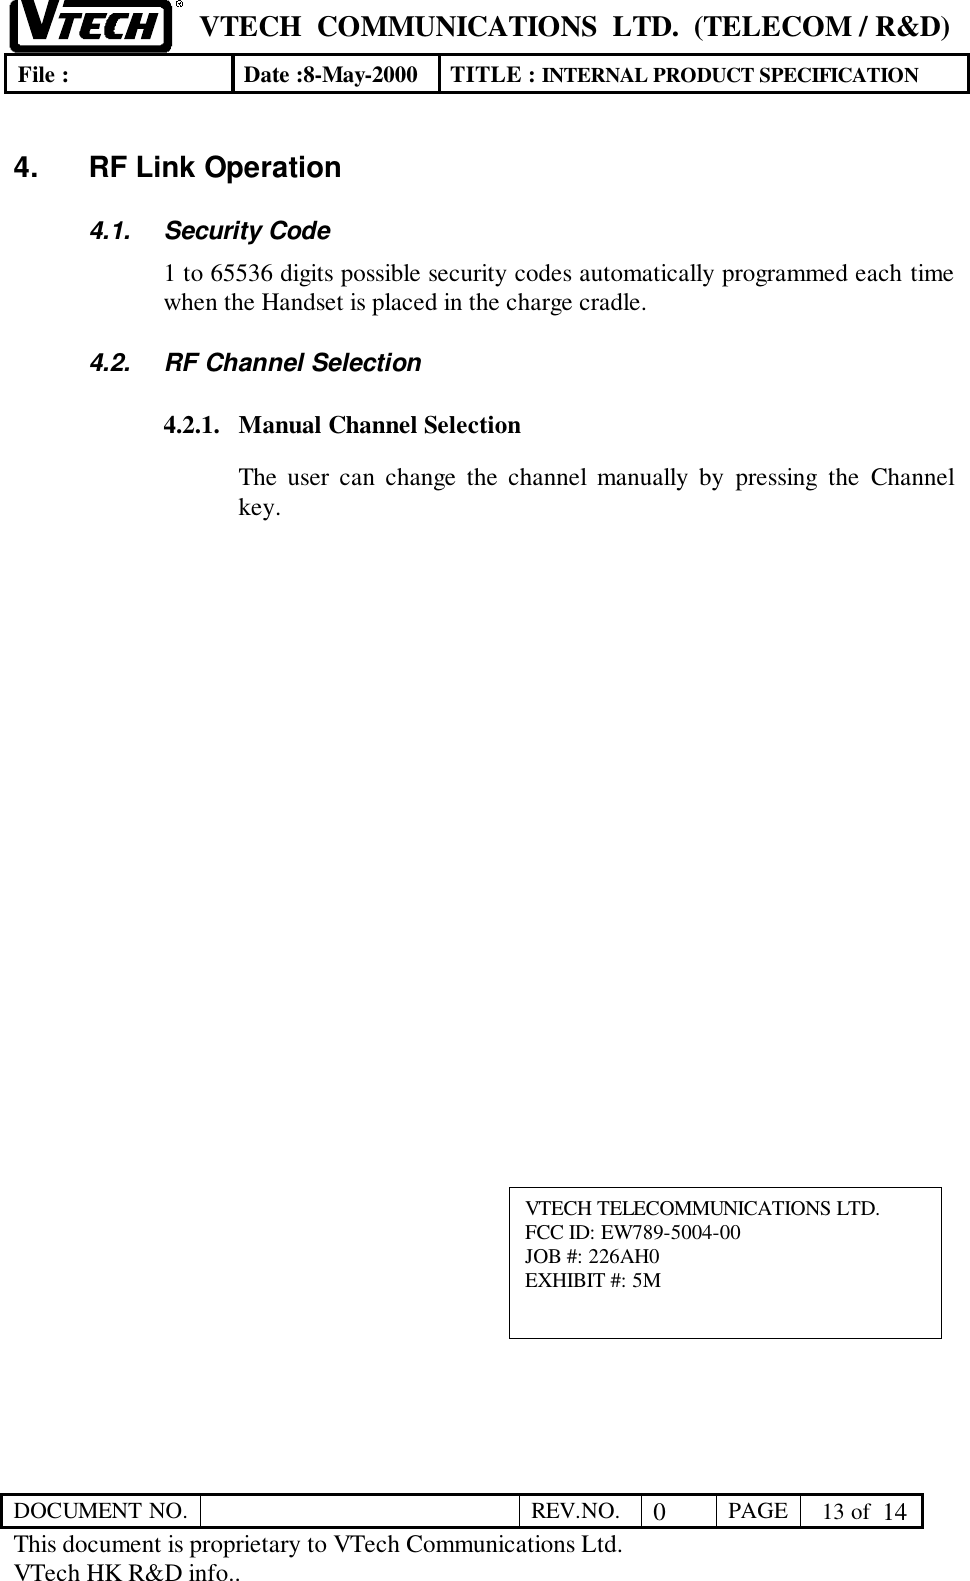 VTECH  COMMUNICATIONS  LTD.  (TELECOM / R&amp;D)File : Date :8-May-2000 TITLE : INTERNAL PRODUCT SPECIFICATIONDOCUMENT NO. REV.NO. 0PAGE  13 of  14This document is proprietary to VTech Communications Ltd.VTech HK R&amp;D info..4.  RF Link Operation4.1. Security Code1 to 65536 digits possible security codes automatically programmed each timewhen the Handset is placed in the charge cradle.4.2.  RF Channel Selection4.2.1. Manual Channel SelectionThe user can change the channel manually by pressing the Channelkey.VTECH TELECOMMUNICATIONS LTD.FCC ID: EW789-5004-00JOB #: 226AH0EXHIBIT #: 5M